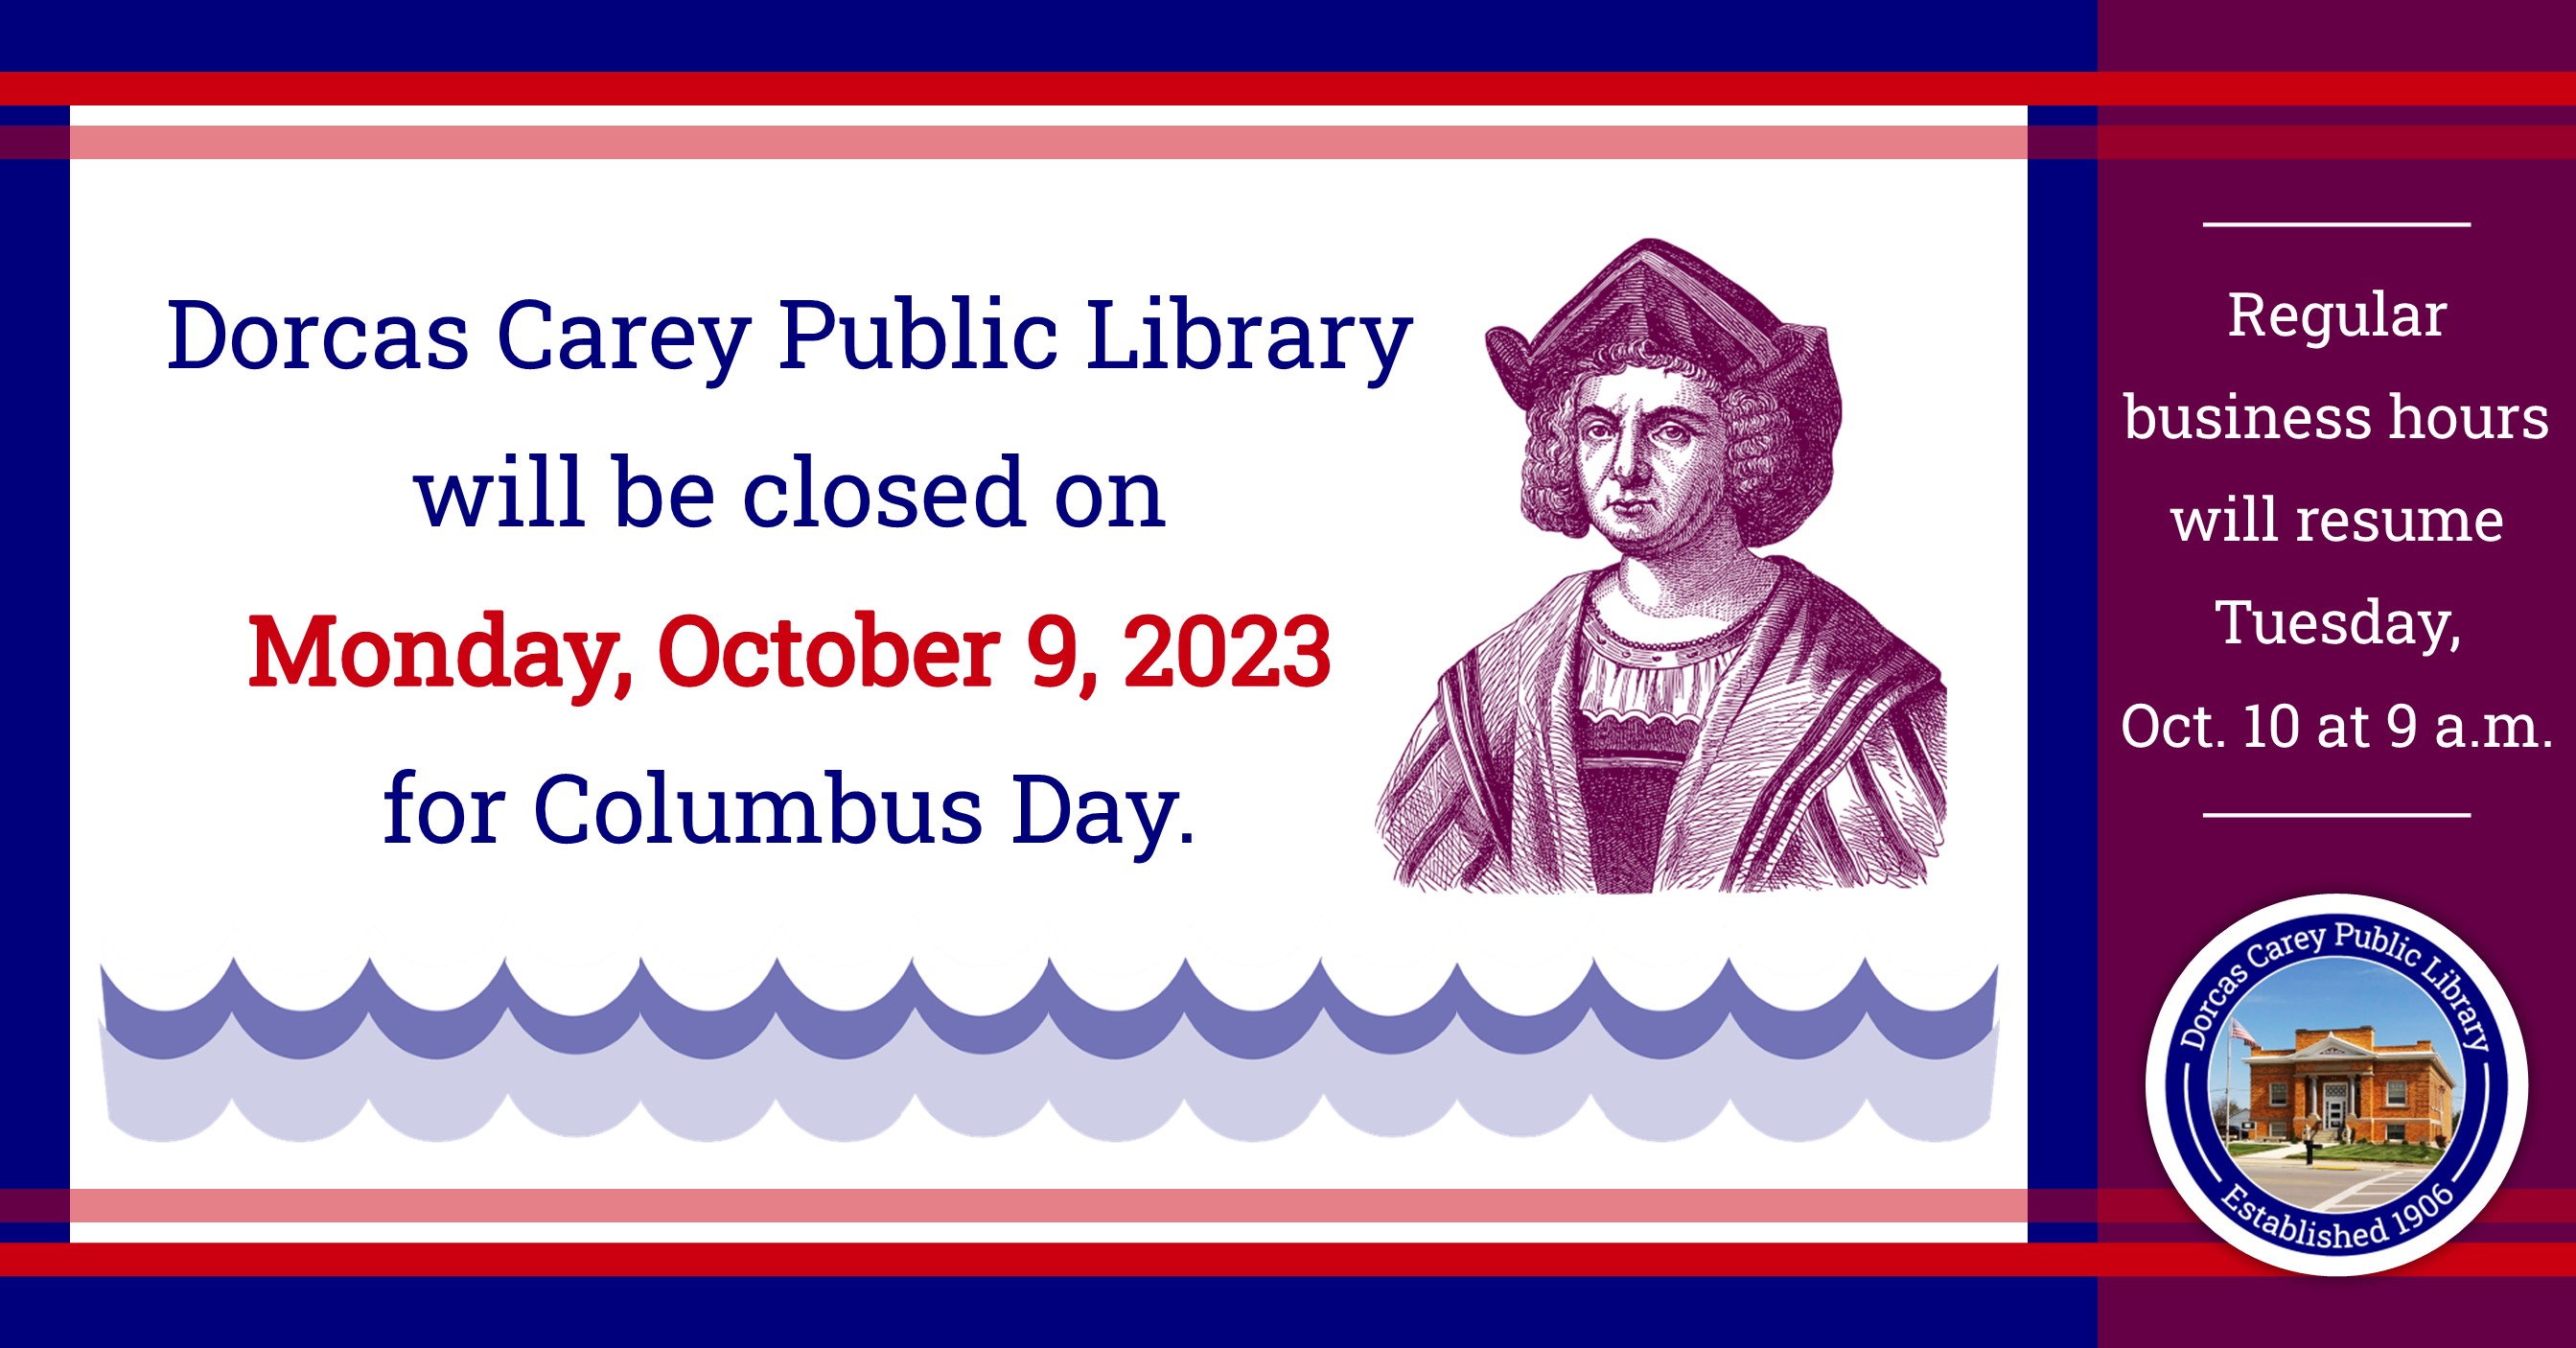 The library will be closed on Monday, October 9th in observance of Columbus Day and will resume regular business hours on Tuesday, October 10th at 9 a.m.  Visit us online at www.dorcascarey.org for your library needs.